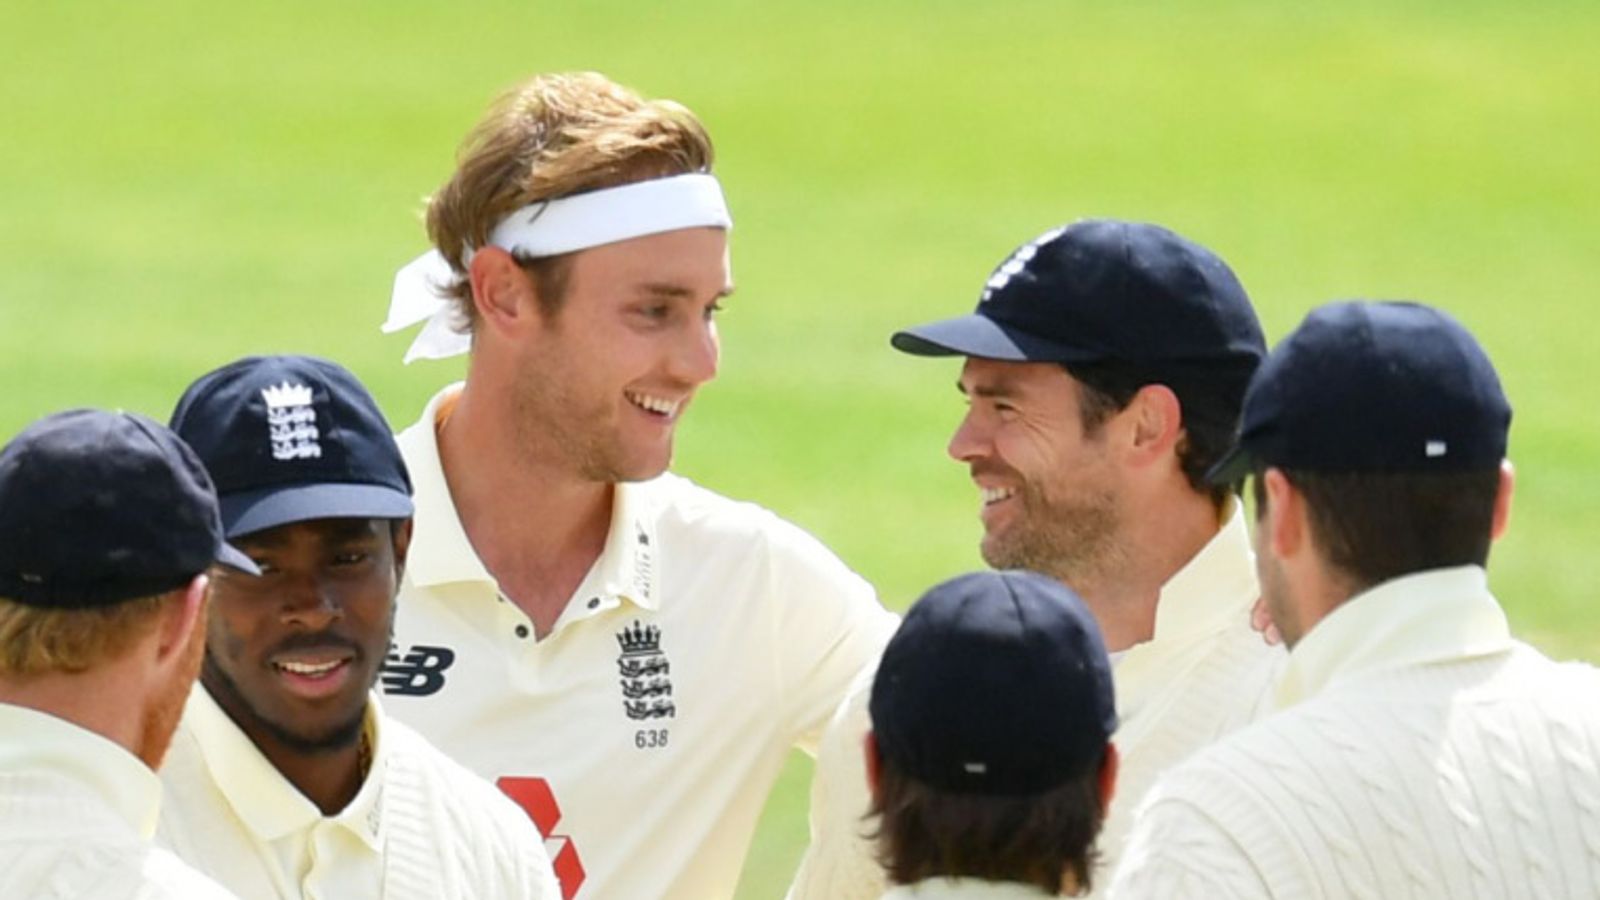 Stuart Broad could get more wickets than me' after 500 comes up